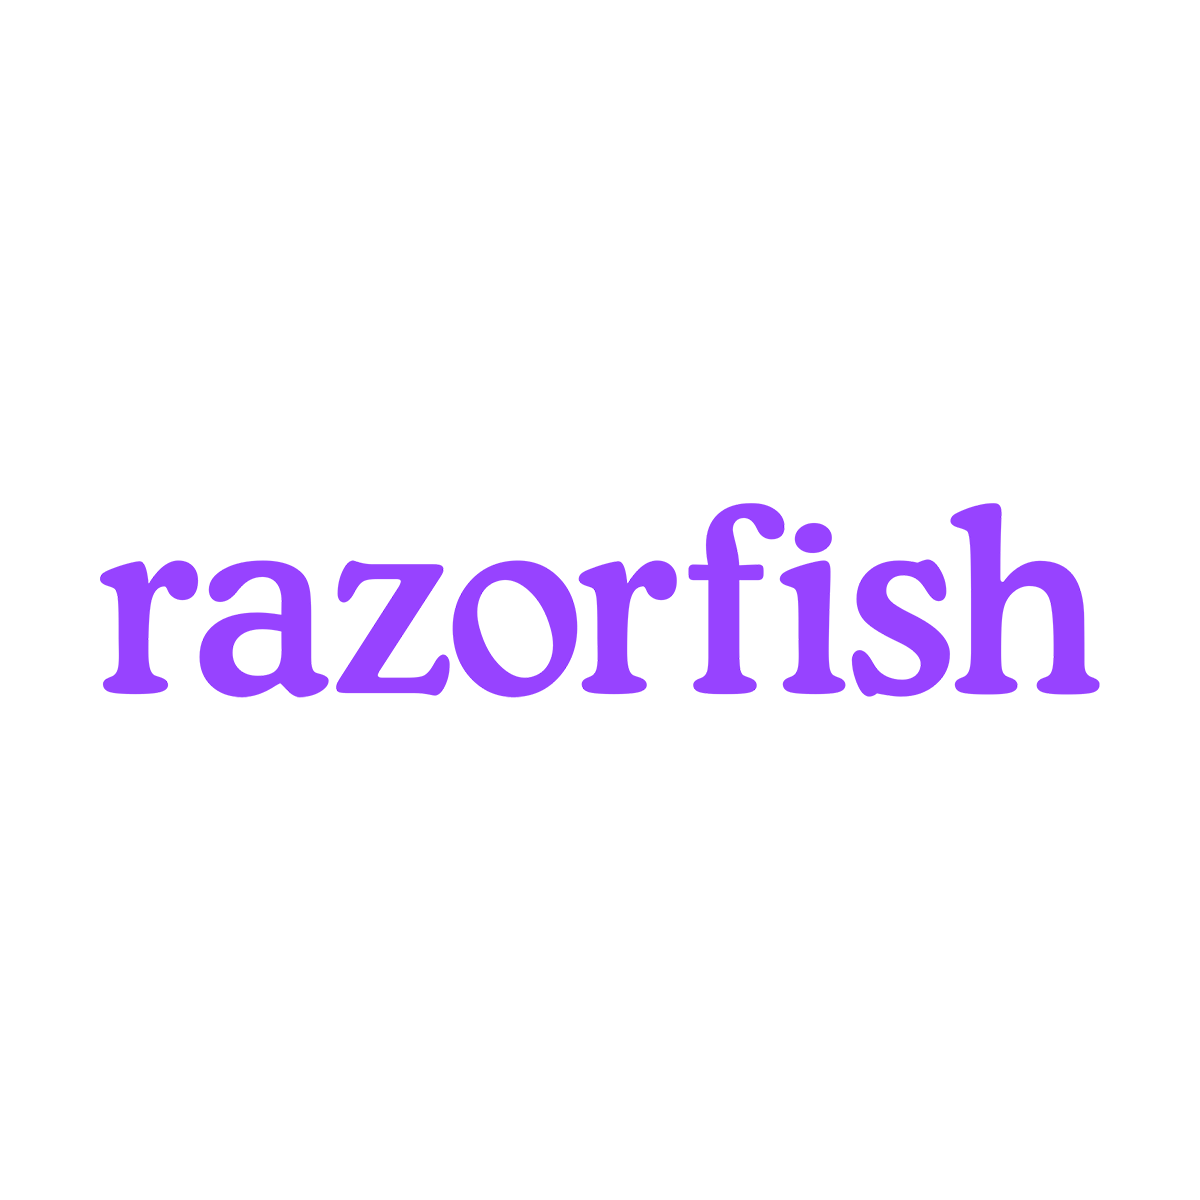 helping brands connect with people | razorfish